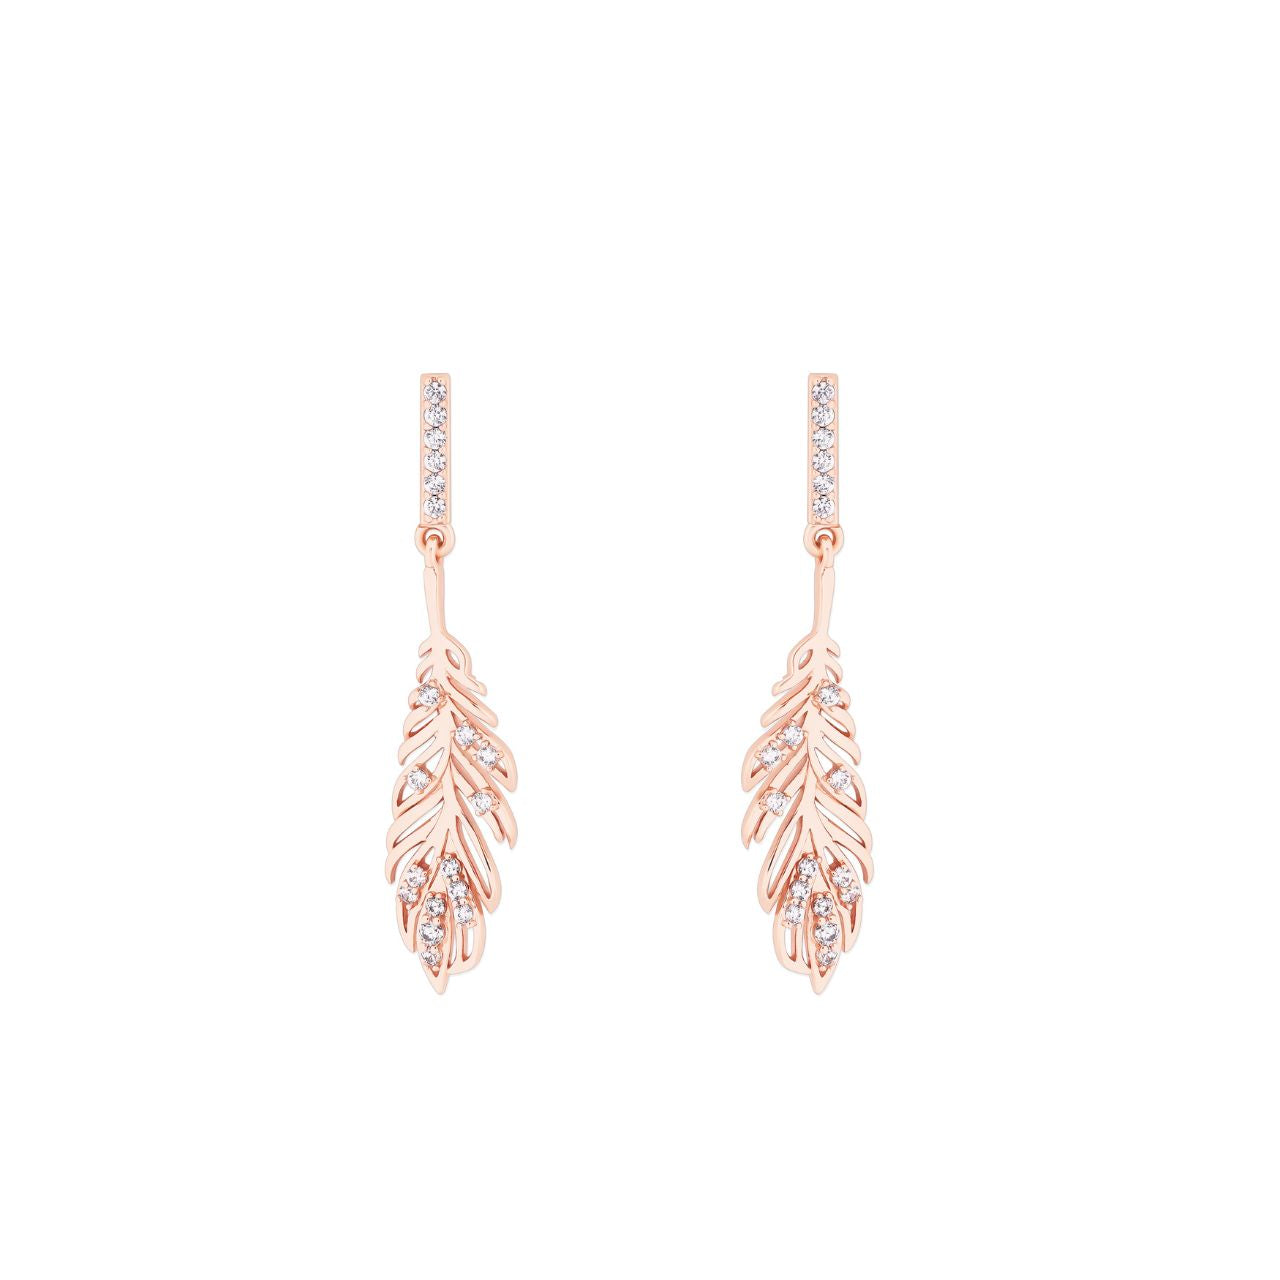 Rose Gold Feather Drop Earrings Inset With Clear CZ by Tipperary  The Tipperary Feather Simple Drop Earrings offer an elegant take on feather jewellery collection in gold. These drop earrings offer a modern twist on traditional jewellery designs. Wear them to add a touch of sophistication to any outfit.